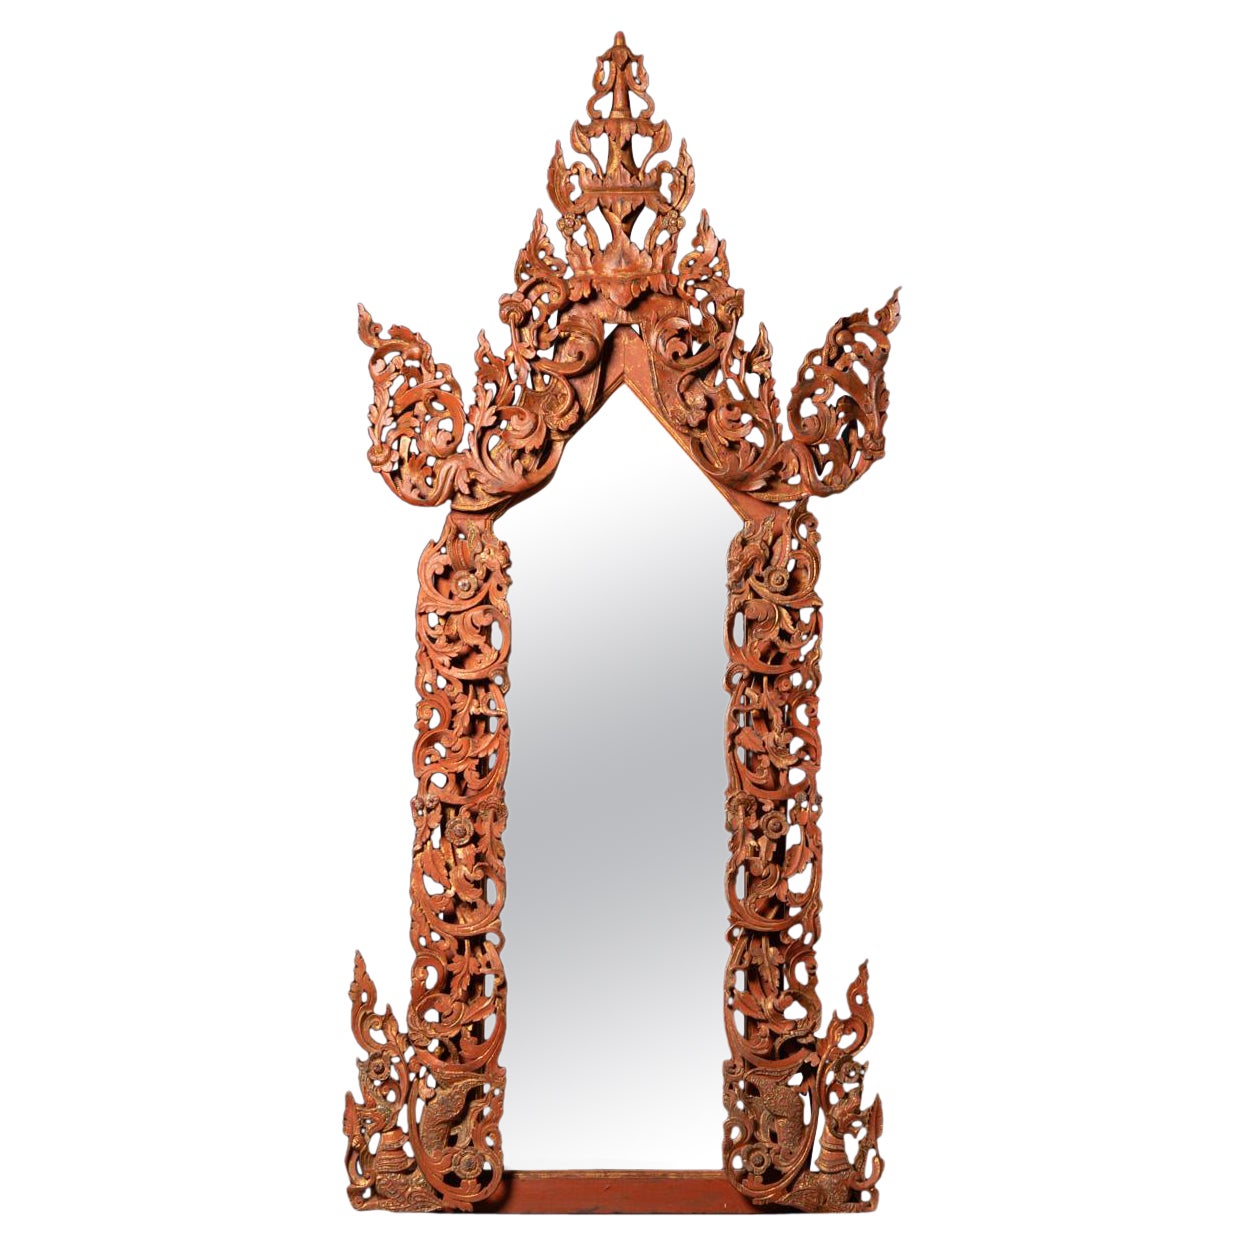 19th century Large antique Burmese mirror in wooden frame from Burma